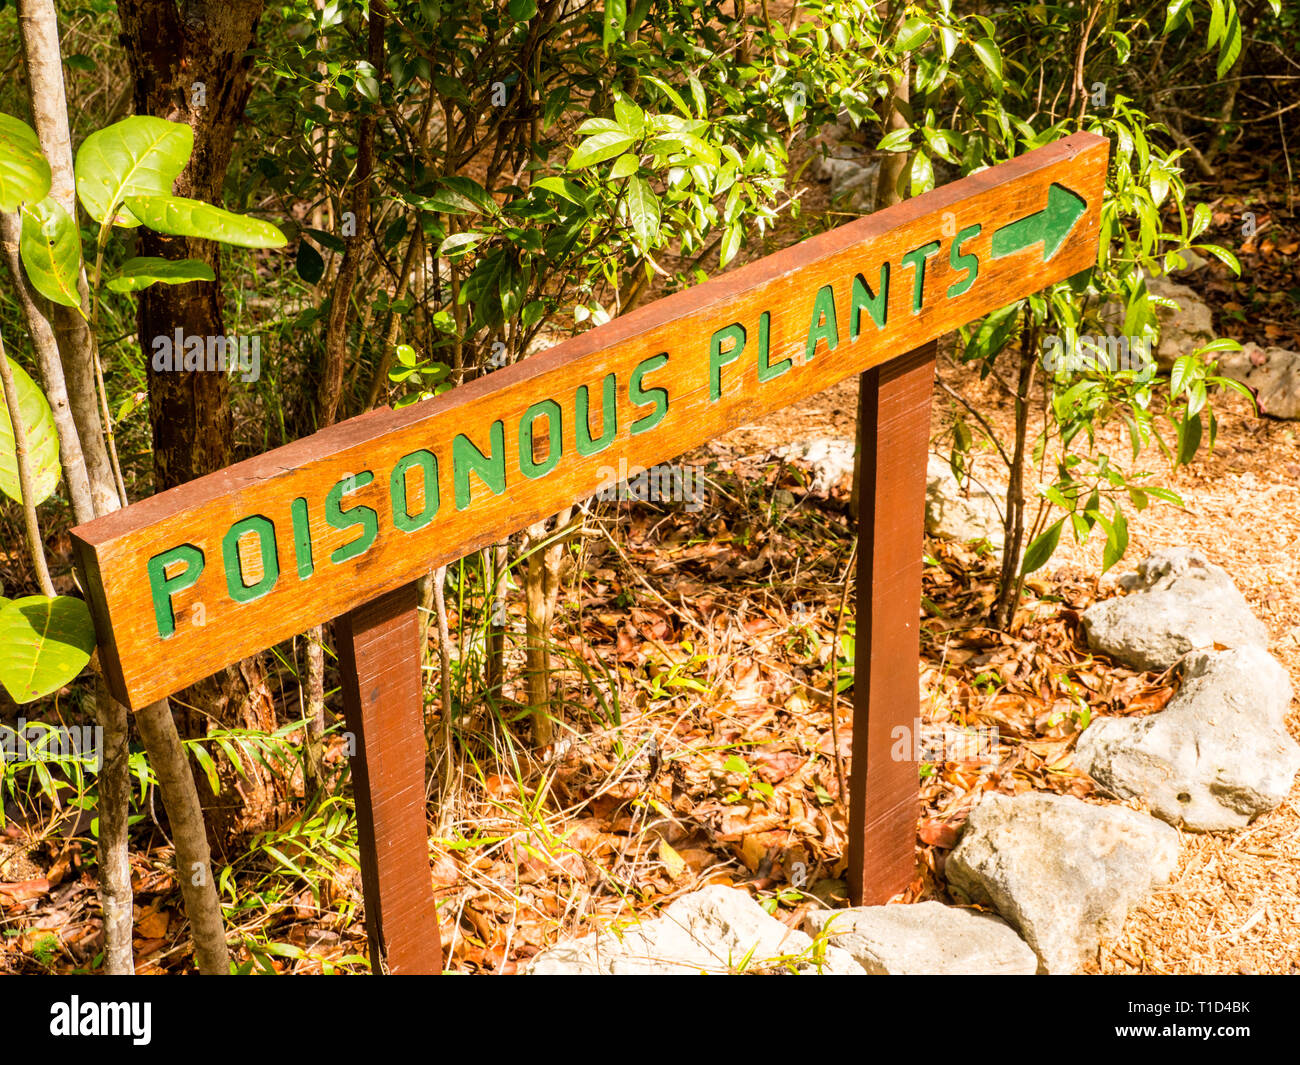 Poisonous Plants Sign, Leon Levy Native Plant Preserve, Governors Harbour, Eleuthera, The Bahamas. Stock Photo